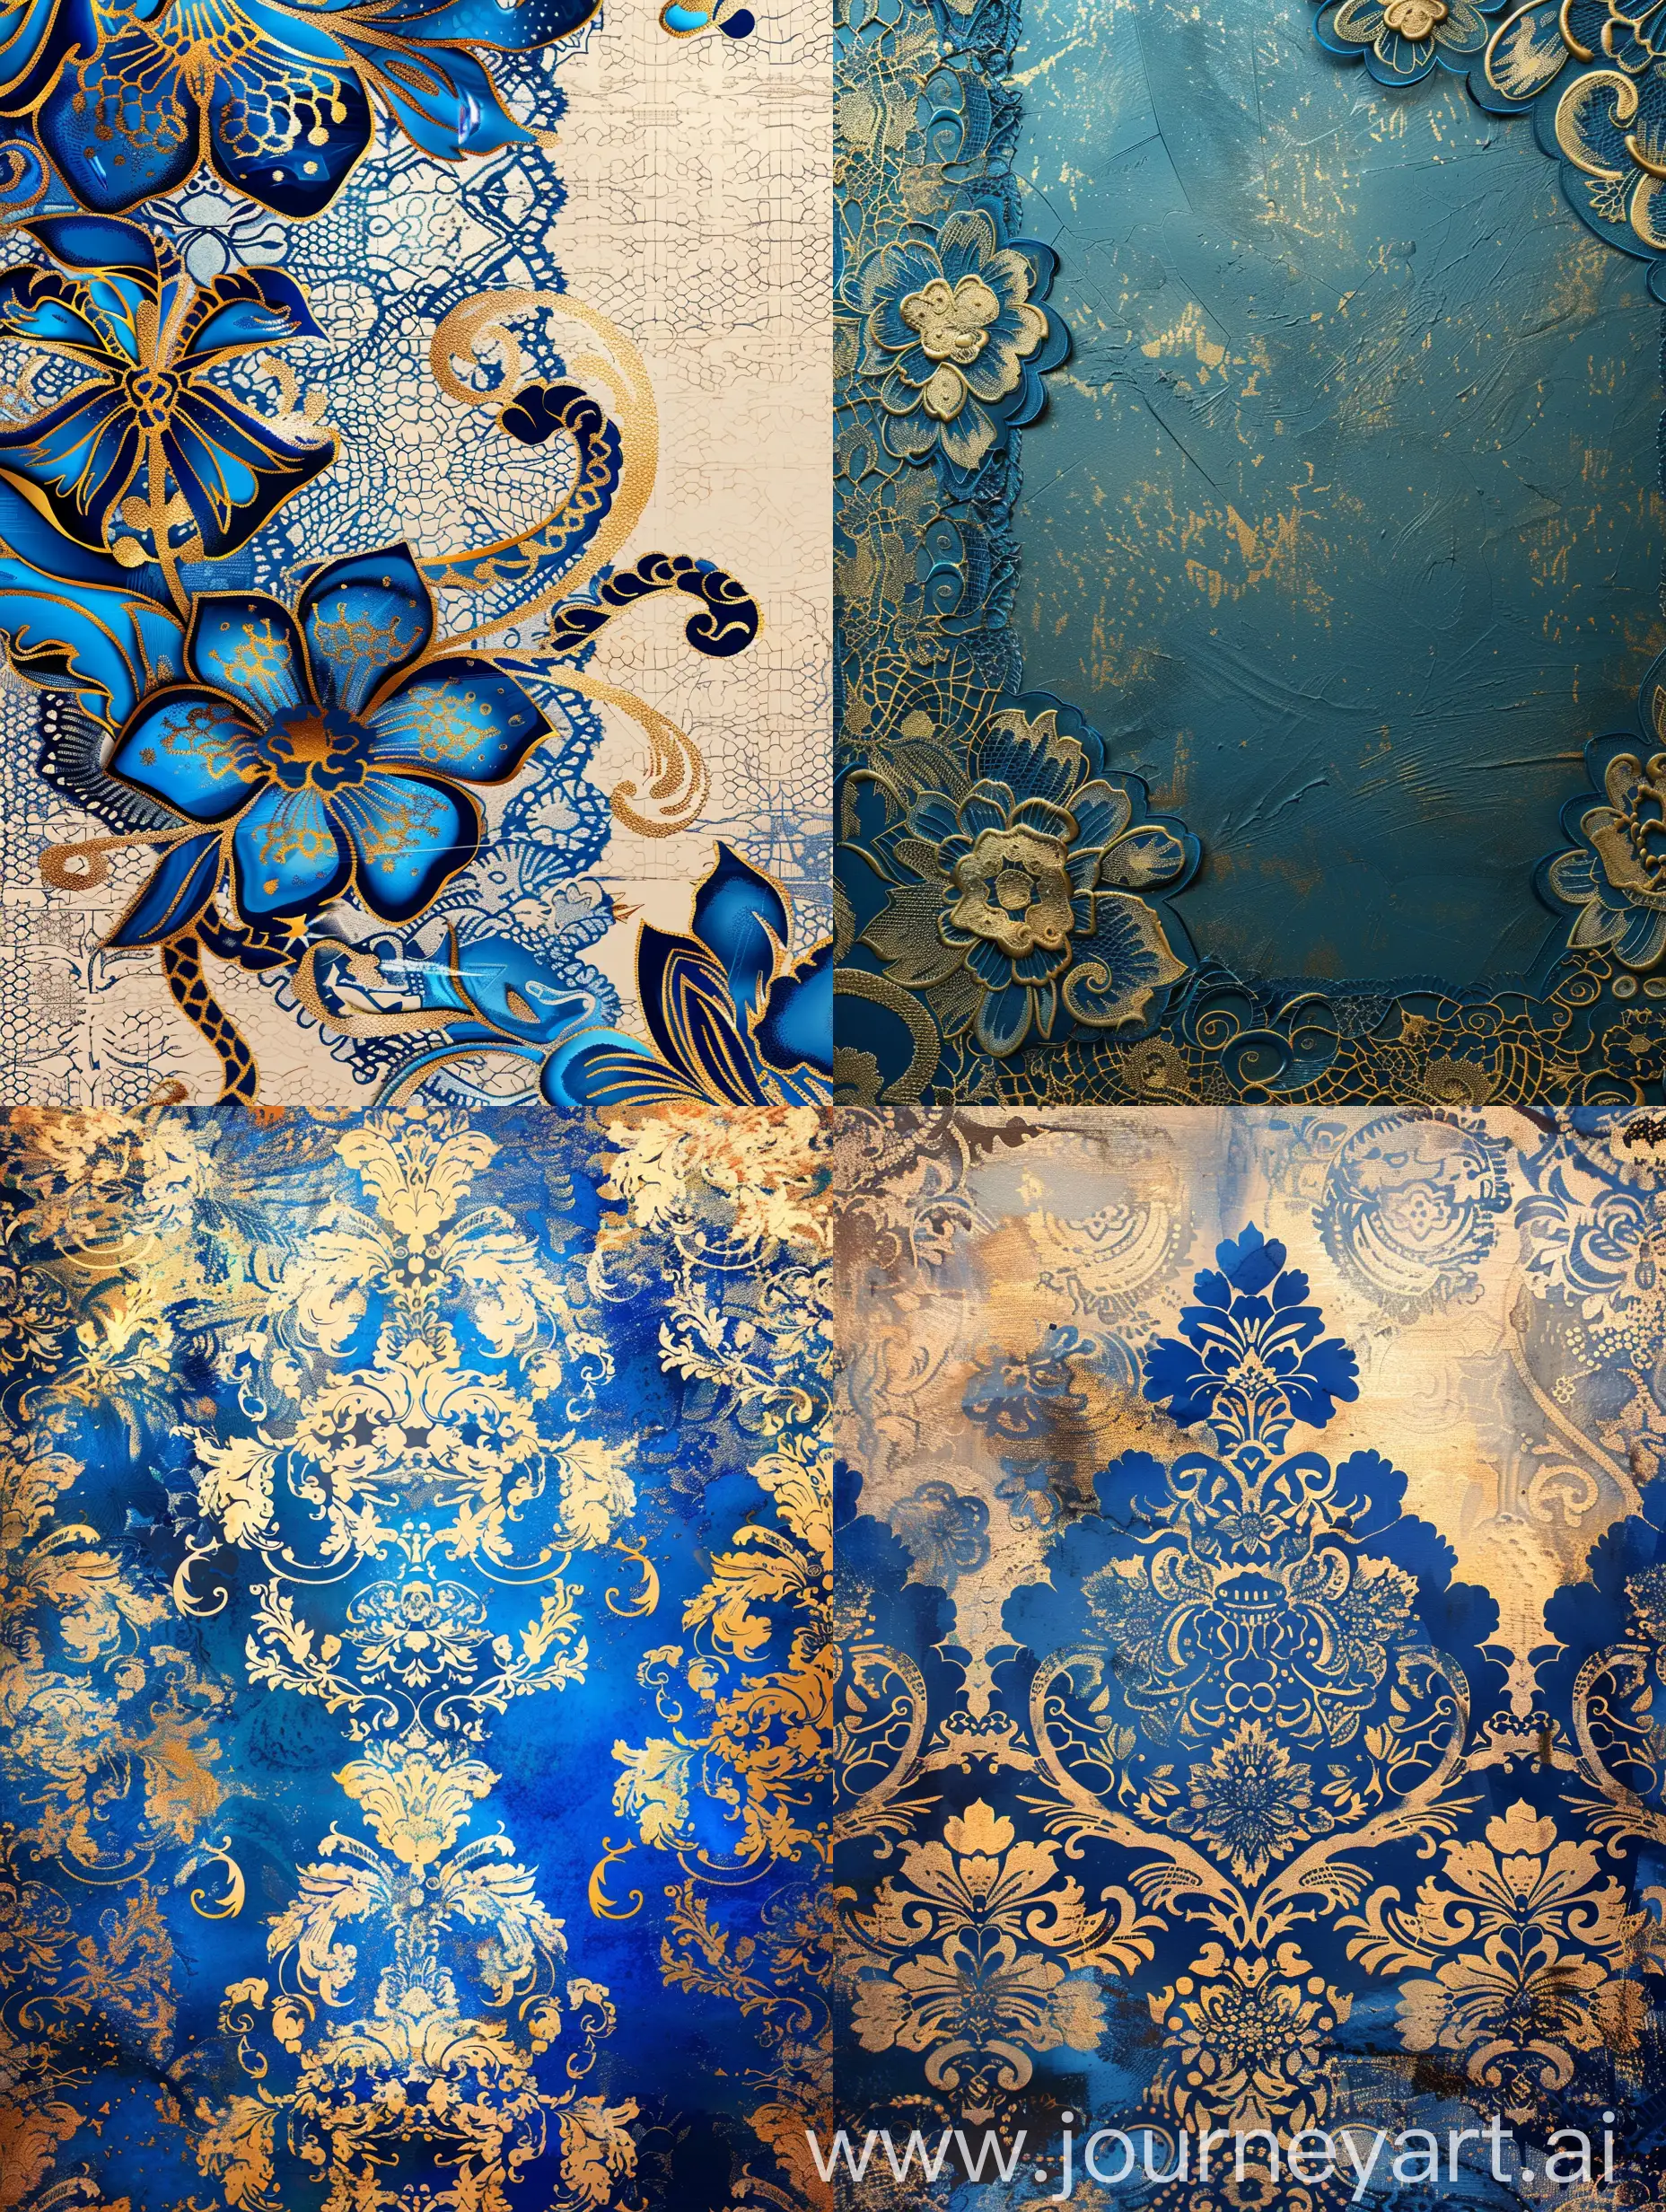 background, 
lace, damask, fantasy, blue and gold.
